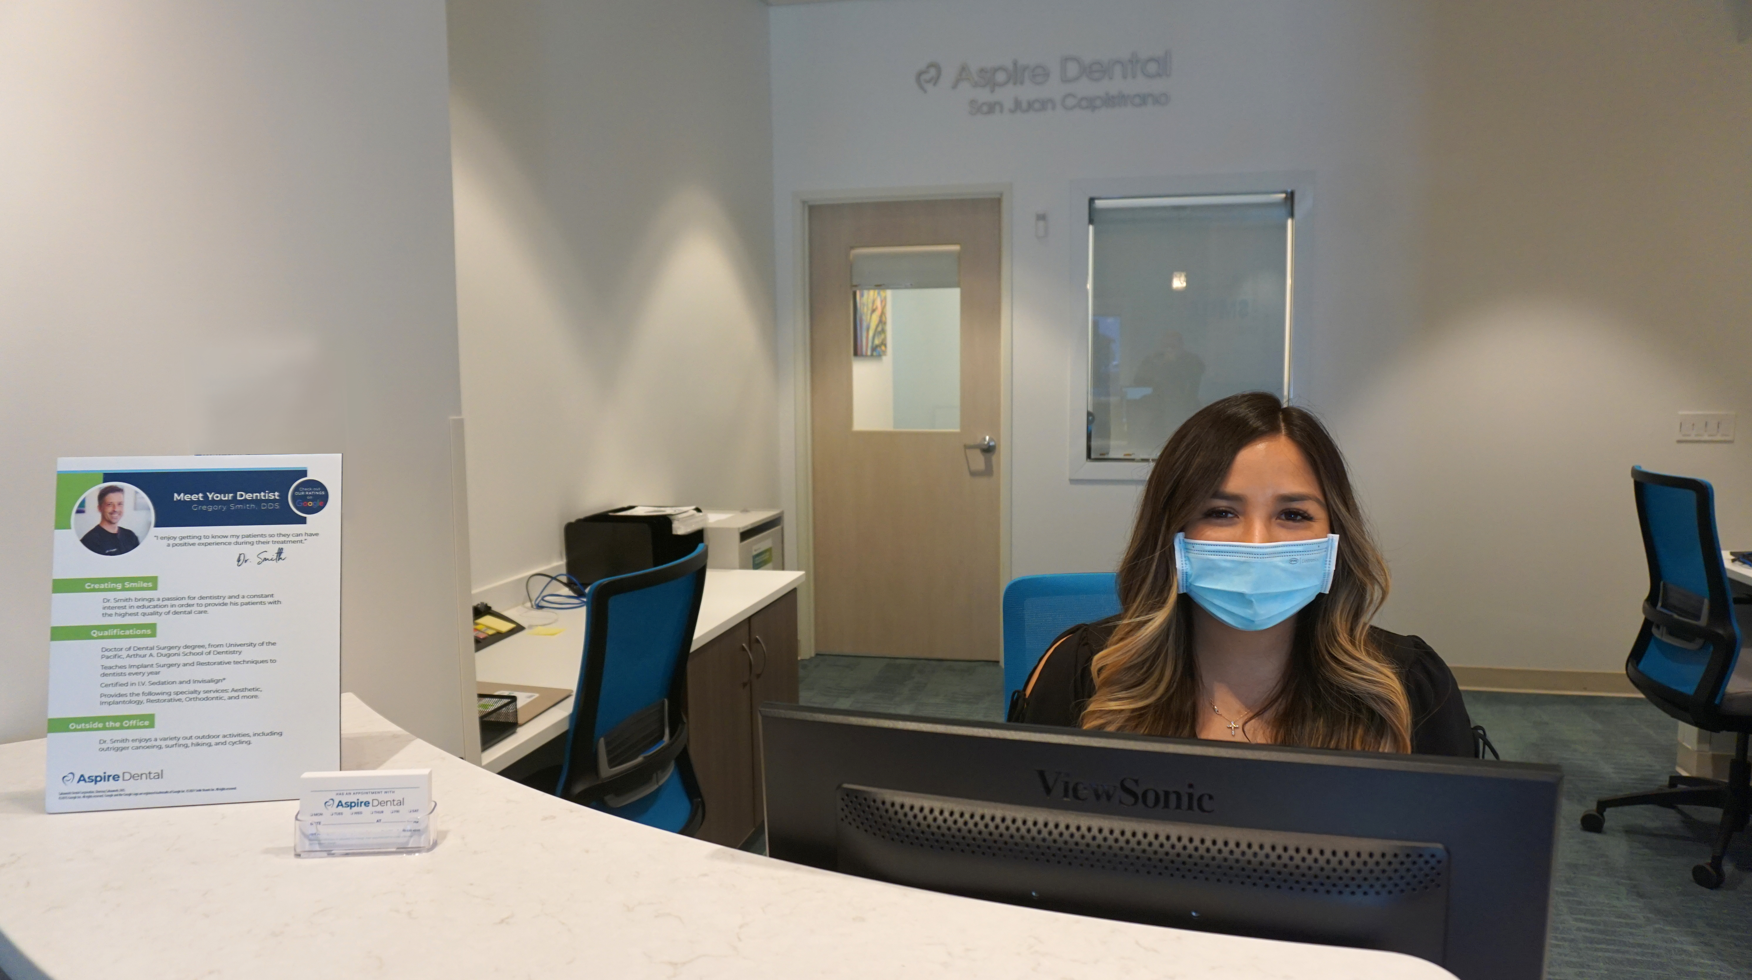 When you first enter our office, you'll be welcomed by our warm and friendly staff. Let them know all your dental needs such as toothaches, fillings, cavities, dental implants, and more!